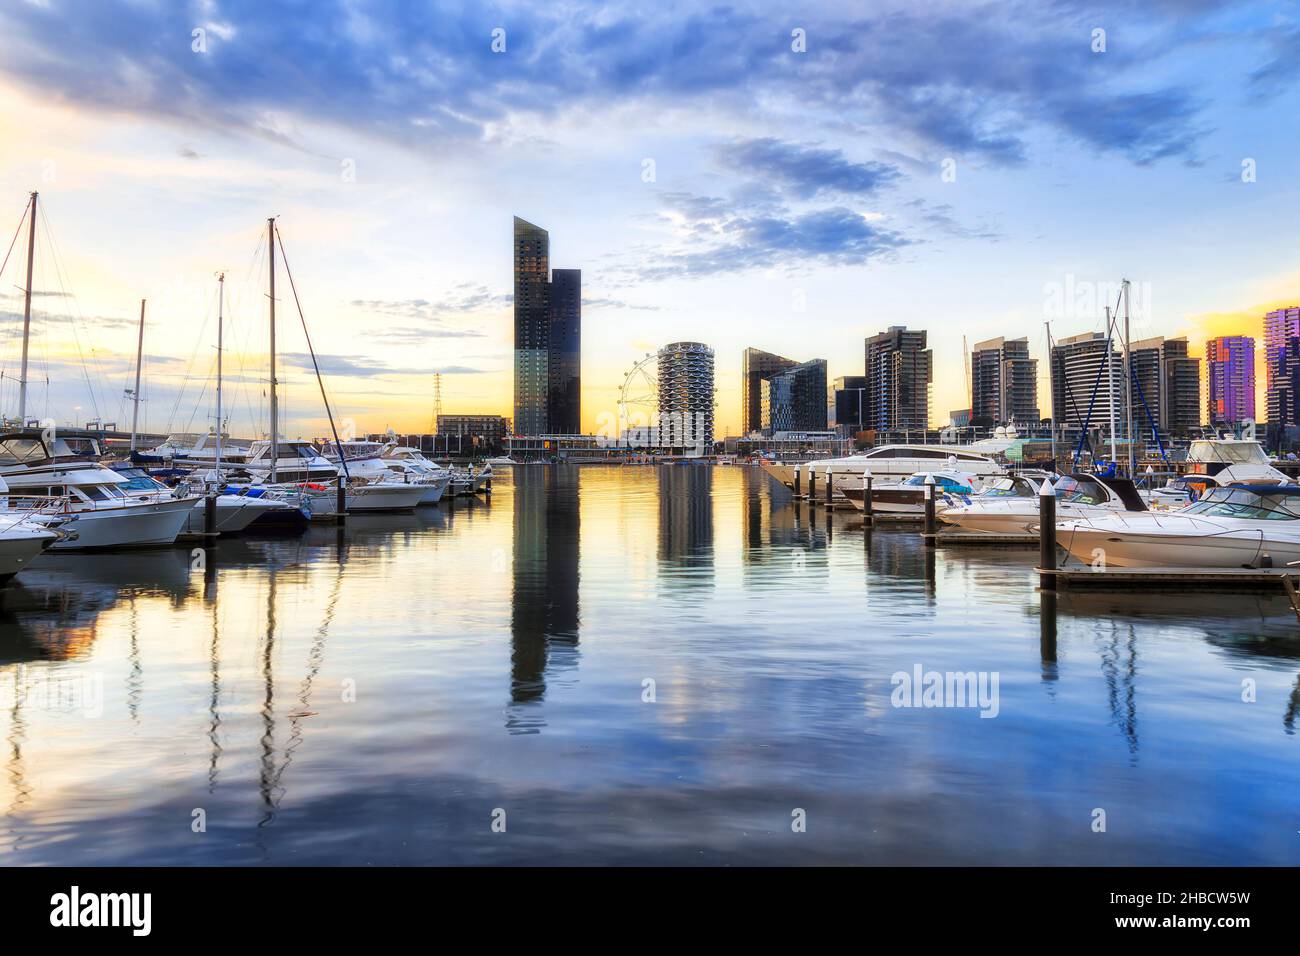 Marina with modern yachts and motor boats on yarra river in Docklands suburb of Melbourne city at sunset. Stock Photo